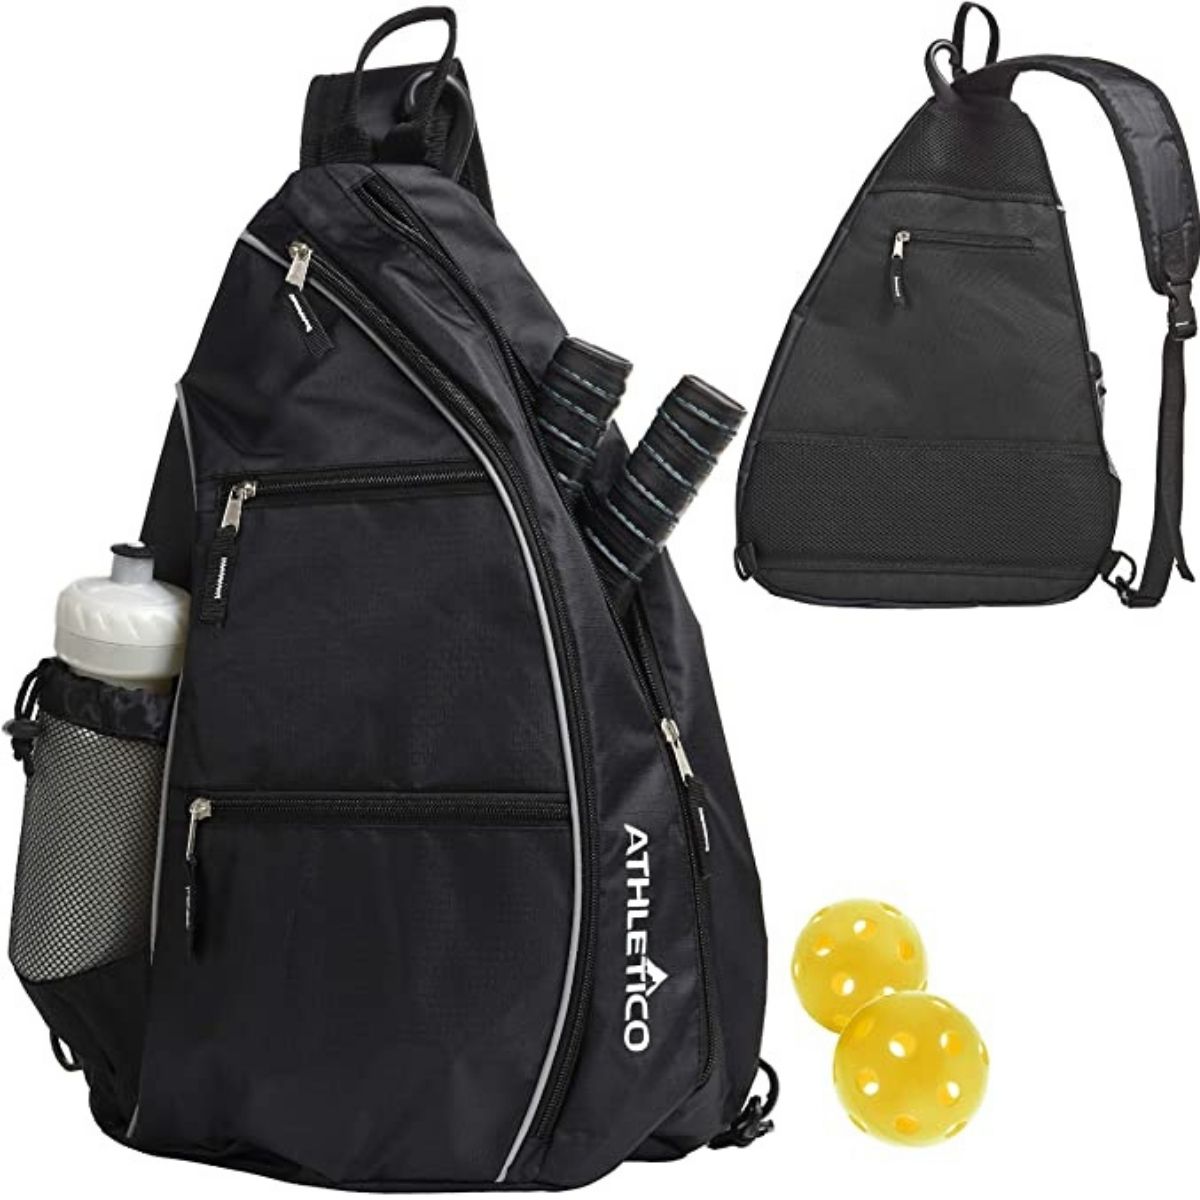 The Best Tennis Bags Options: Athletico Sling Bag 